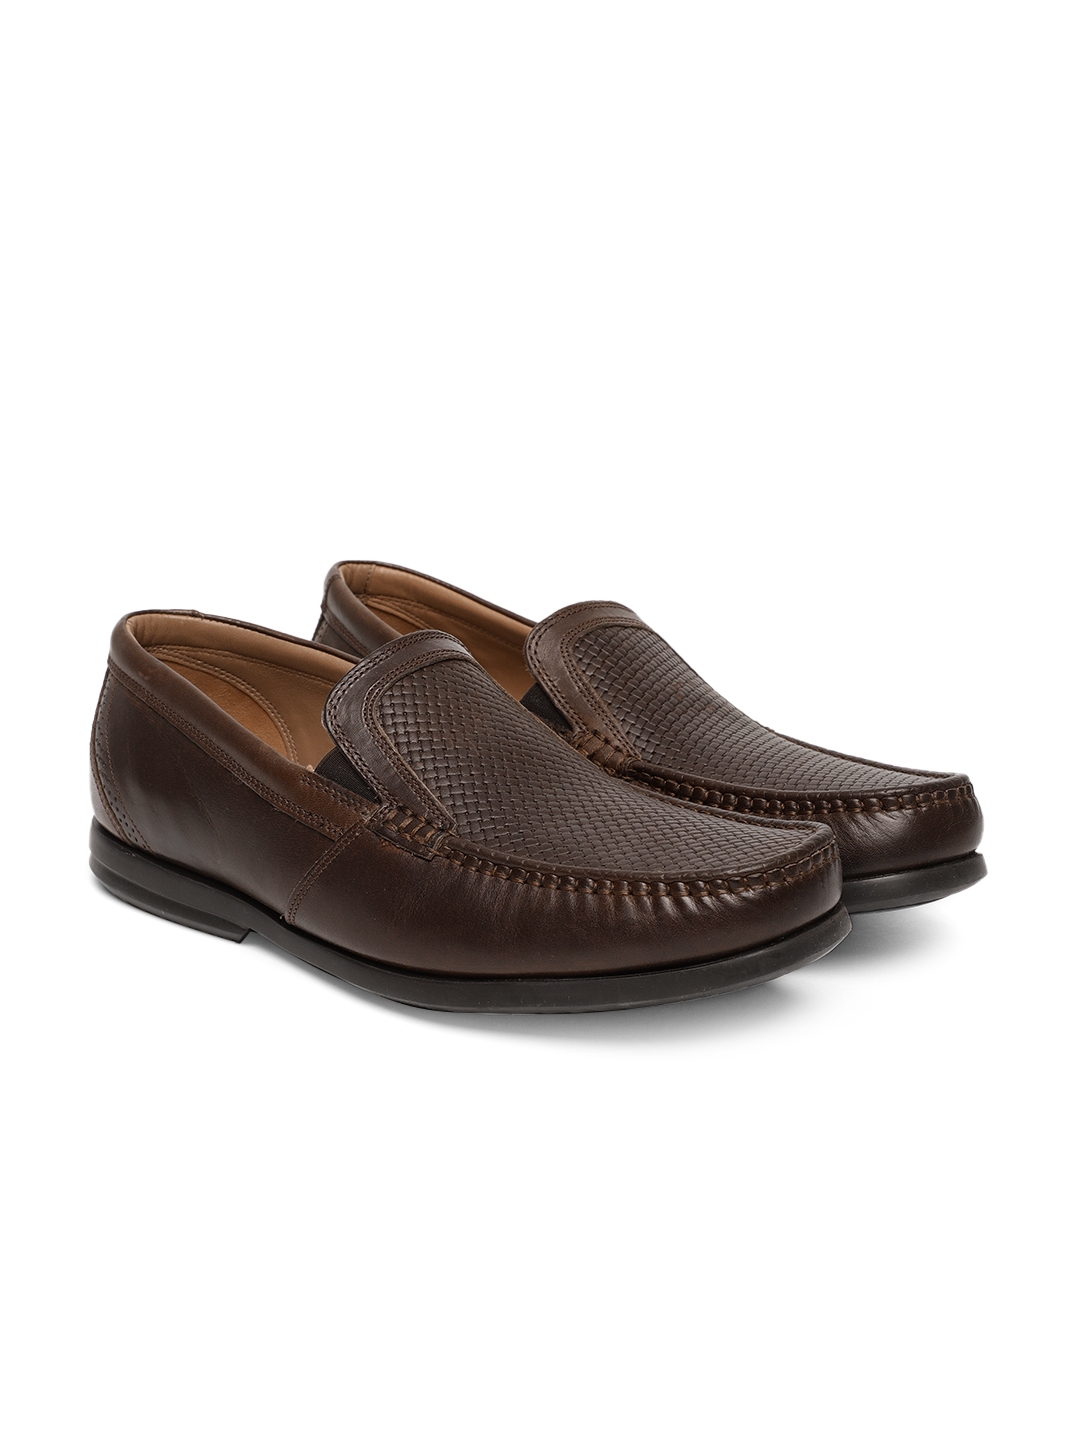 Buy Clarks Men Brown Textured Leather Loafers - Casual Shoes for Men ...